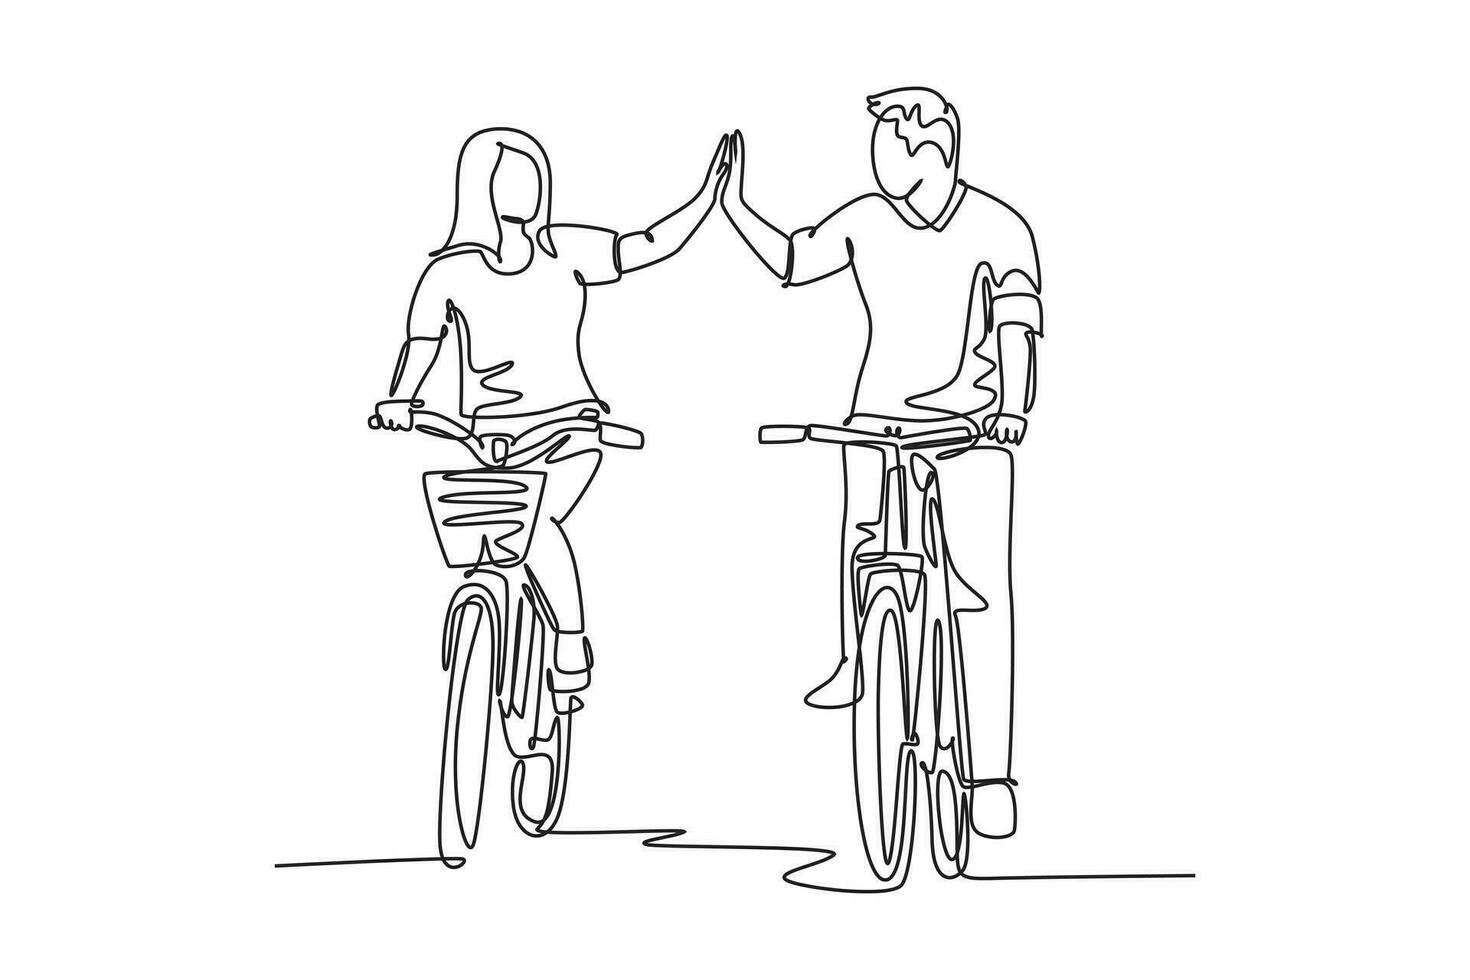 Single one line drawing young happy couple riding bicycle romantically holding hands together at outdoor park. Love relationship concept. Modern continuous line draw design graphic vector illustration